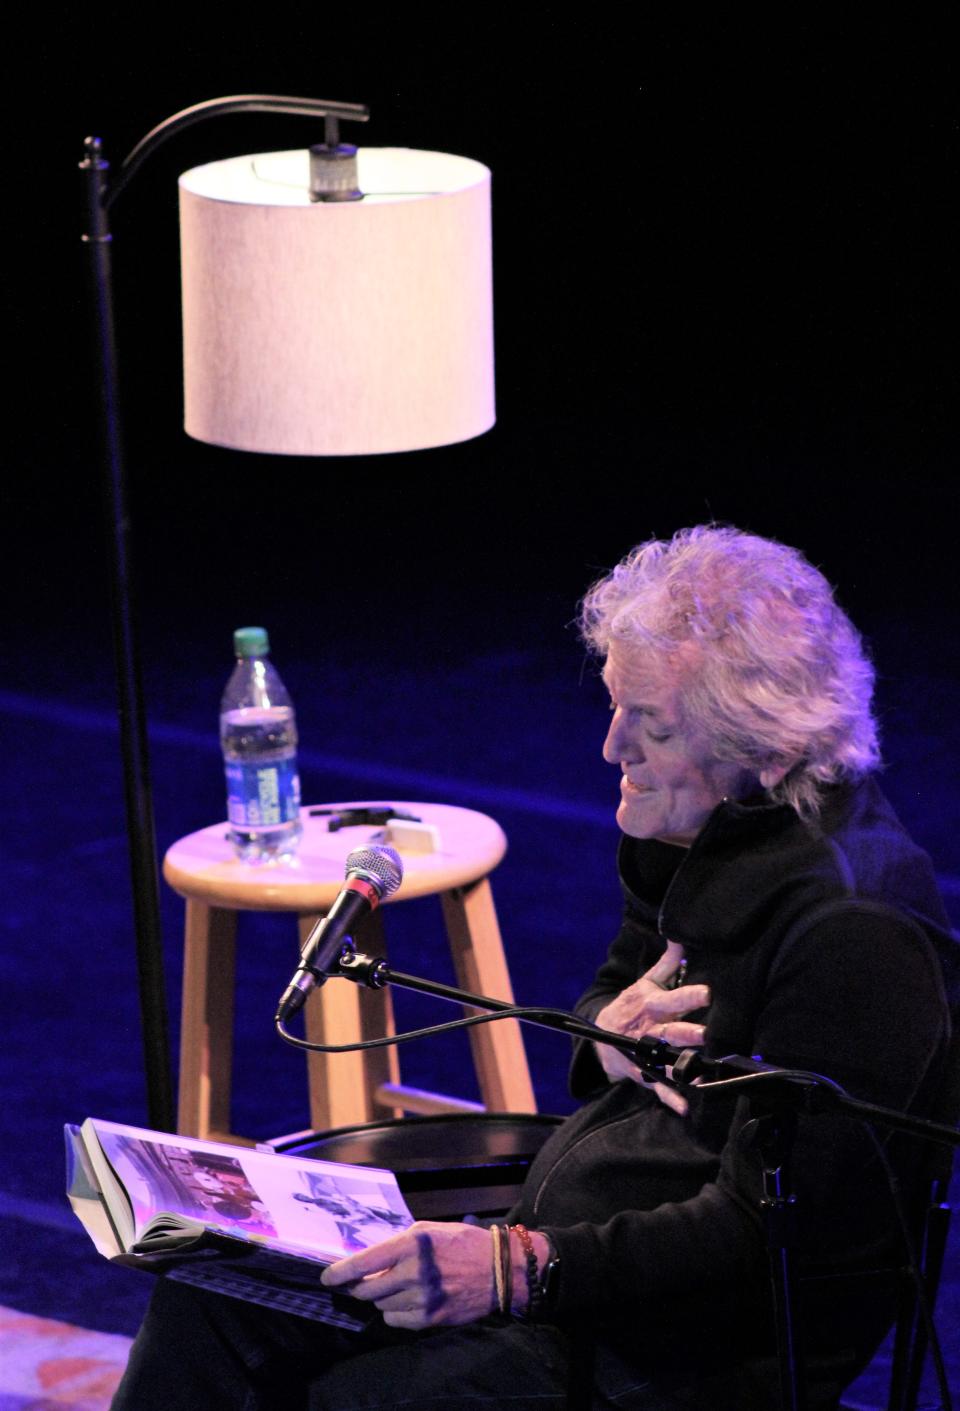 In addition to singing, Rodney Crowell took a seat and read from his book "Word for Word" during his Friday night solo show.